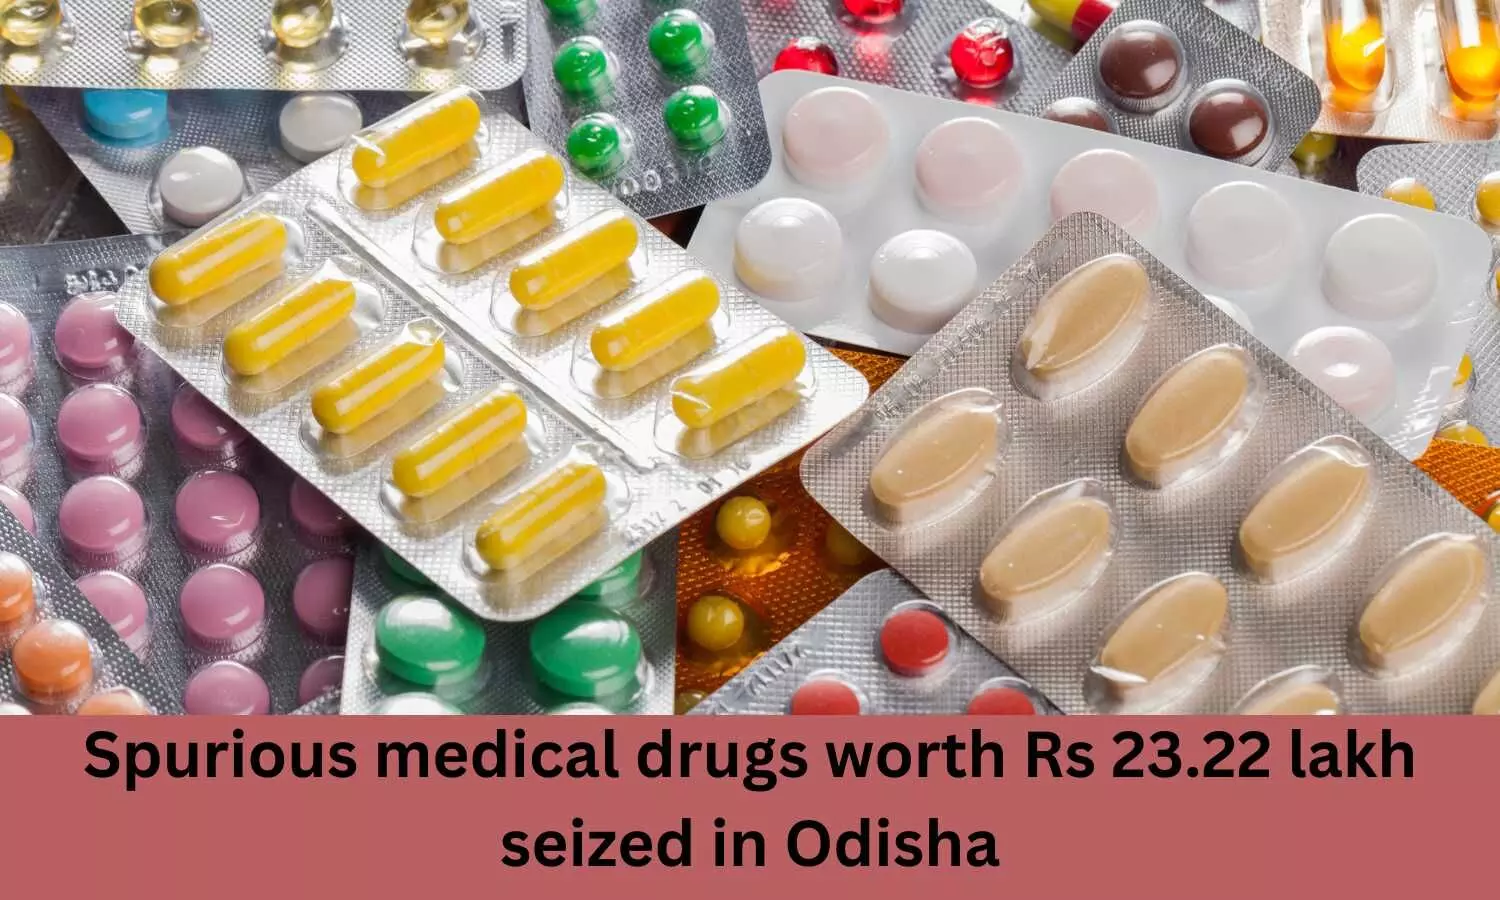 Spurious medical drugs worth Rs 23.22 lakh seized in Odisha